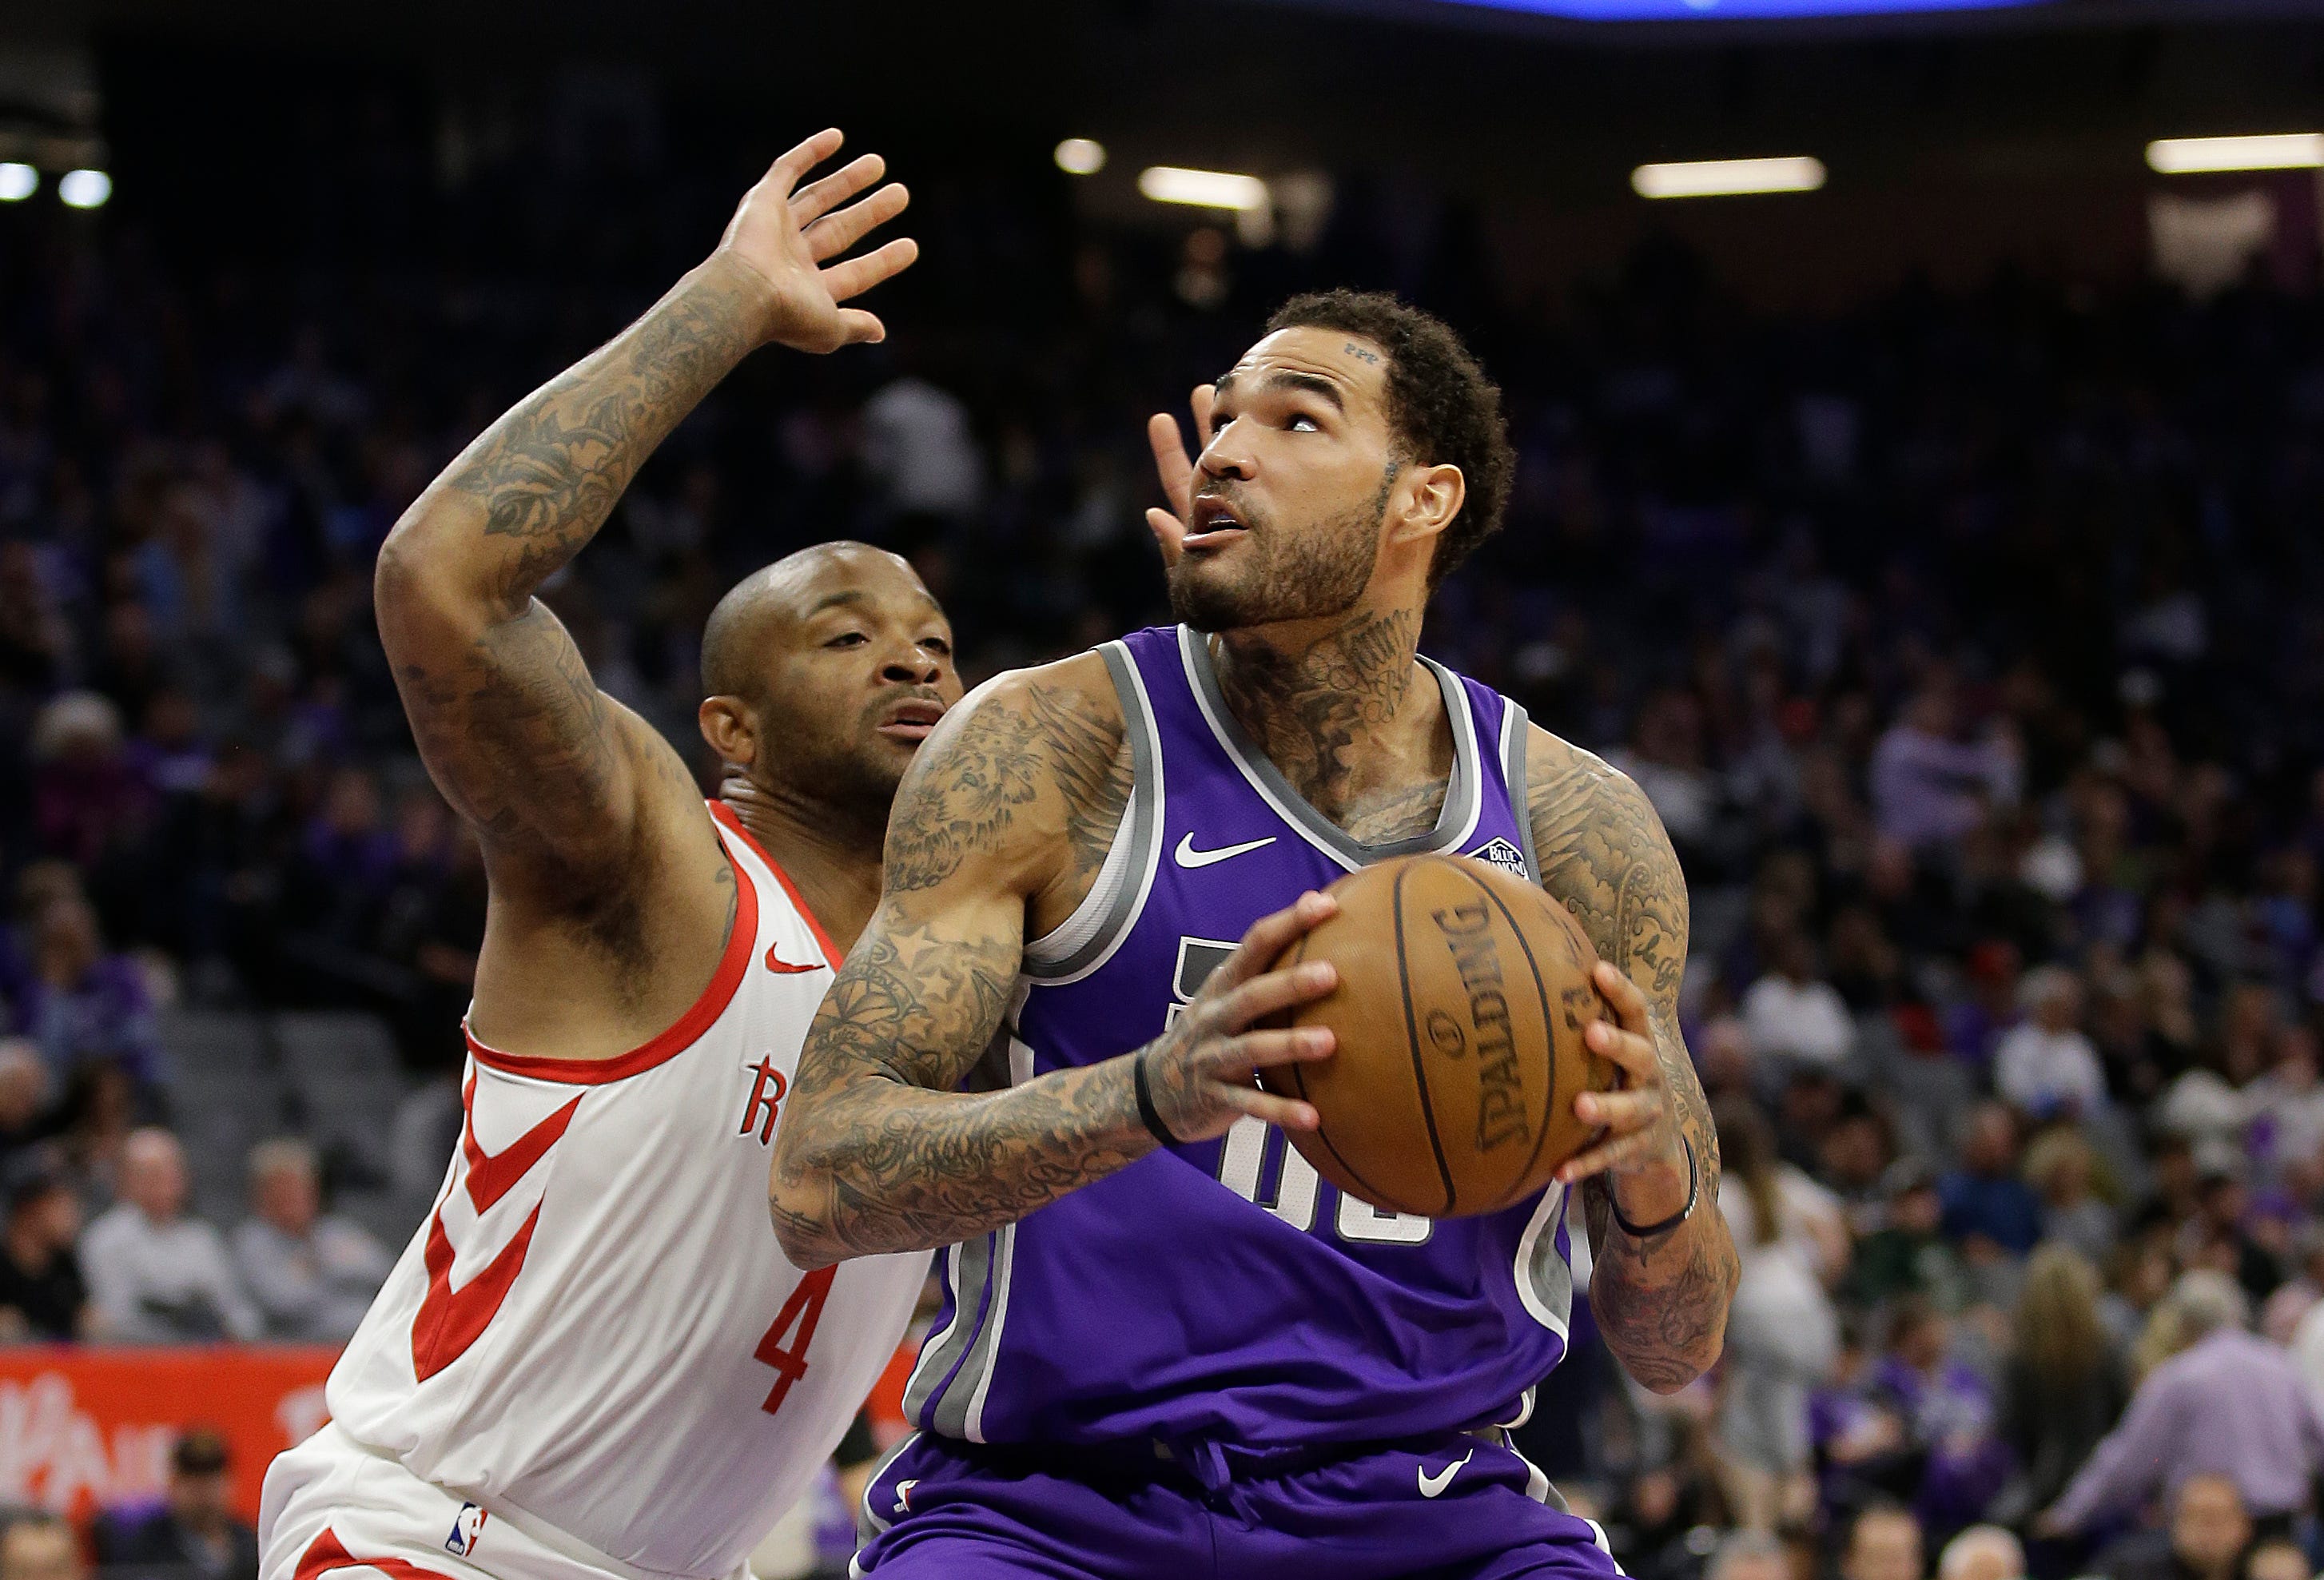 Why fishing almost kept NBA free agent Willie Cauley-Stein from signing with the Warriors